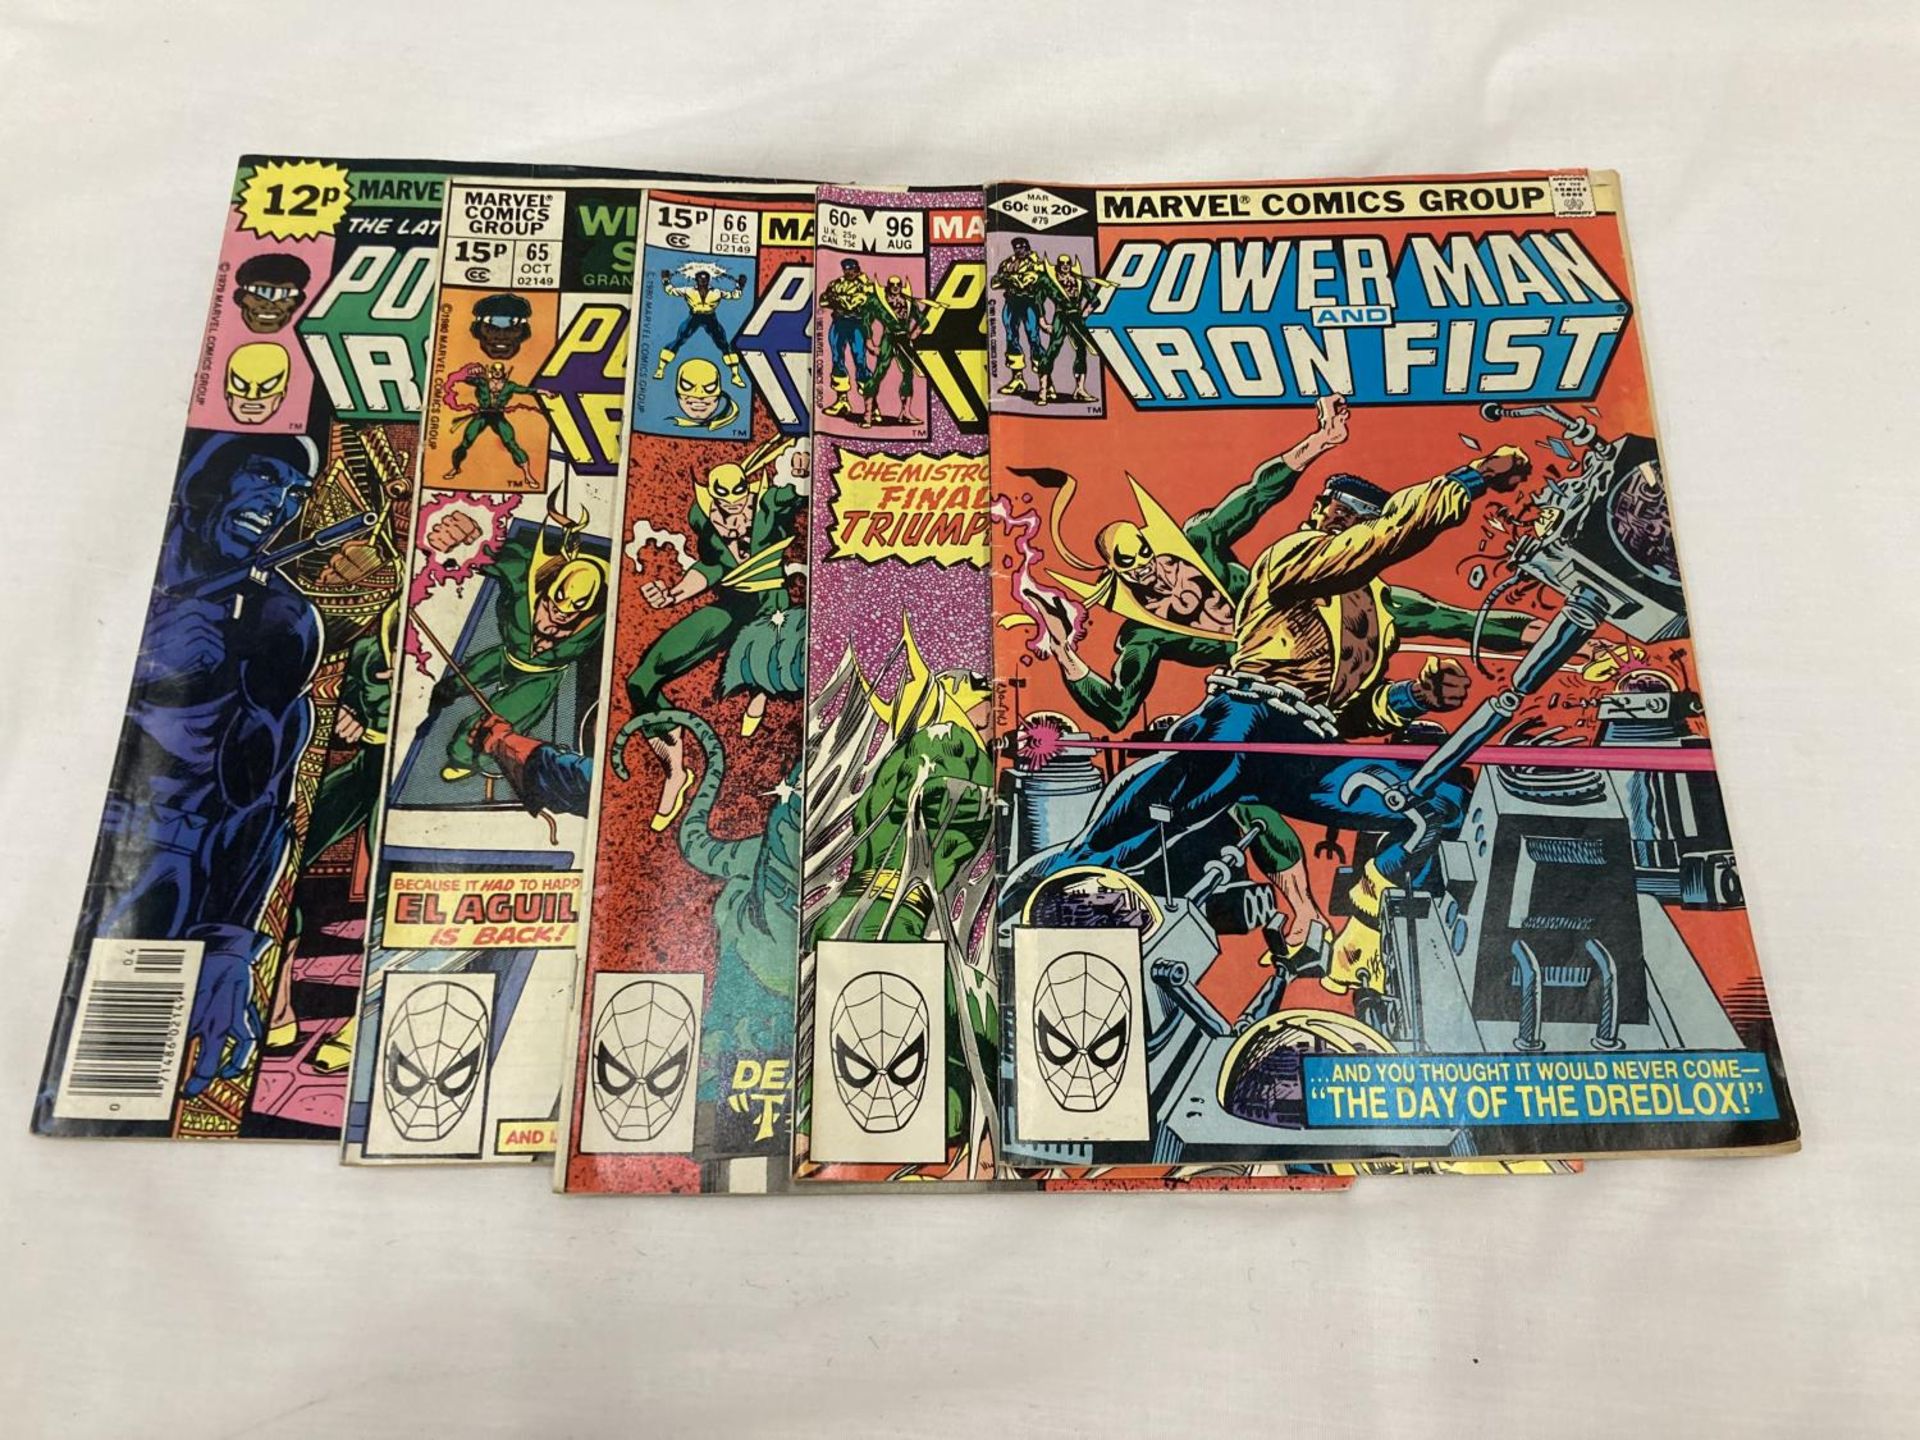 FIVE VINTAGE MARVEL POWERMAN AND IRON FISH COMICS FROM THE 1970'S